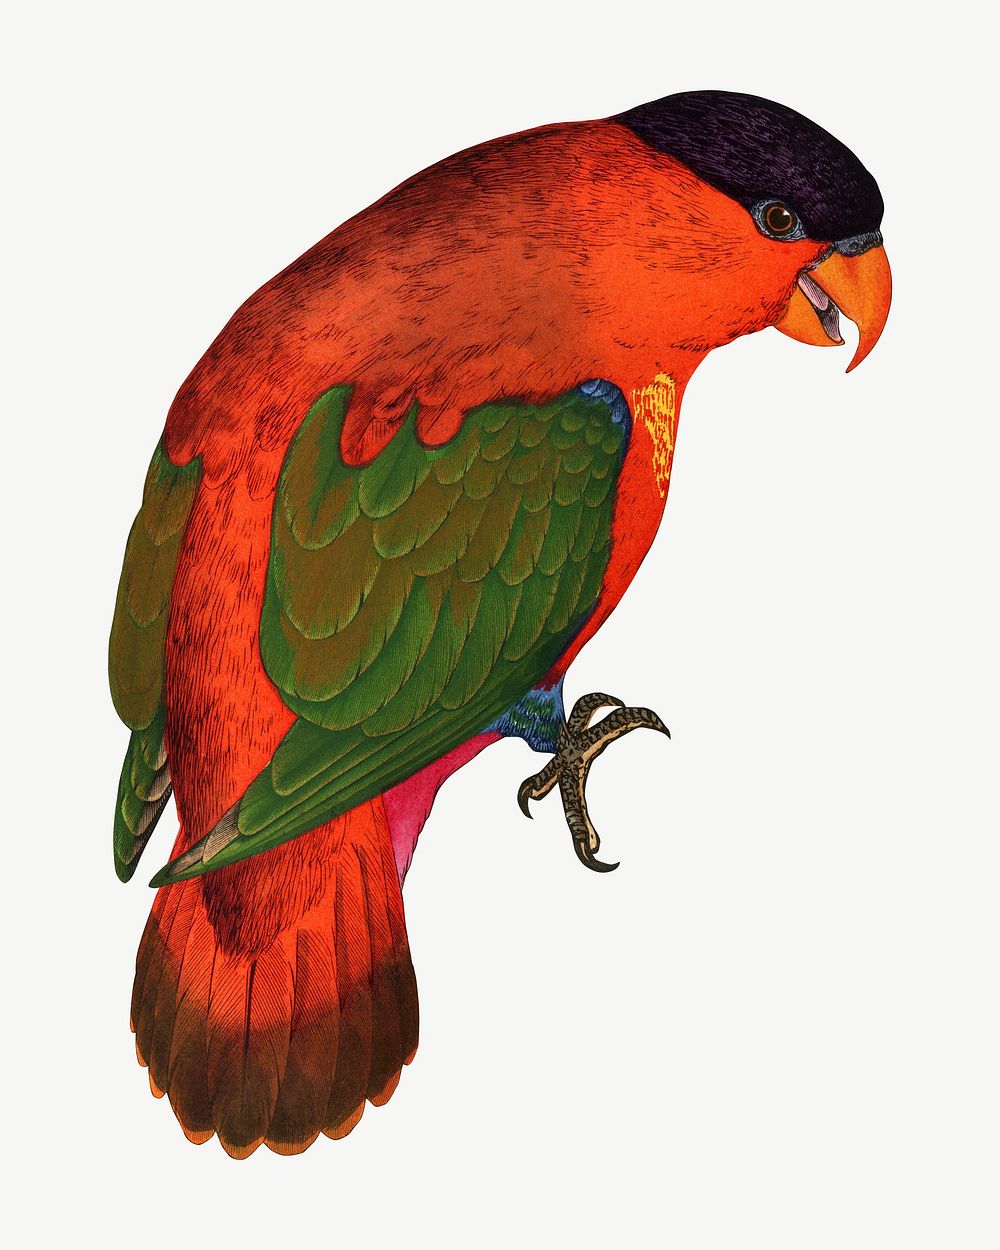 Purple-capped lory, vintage bird illustration psd. Remixed by rawpixel.